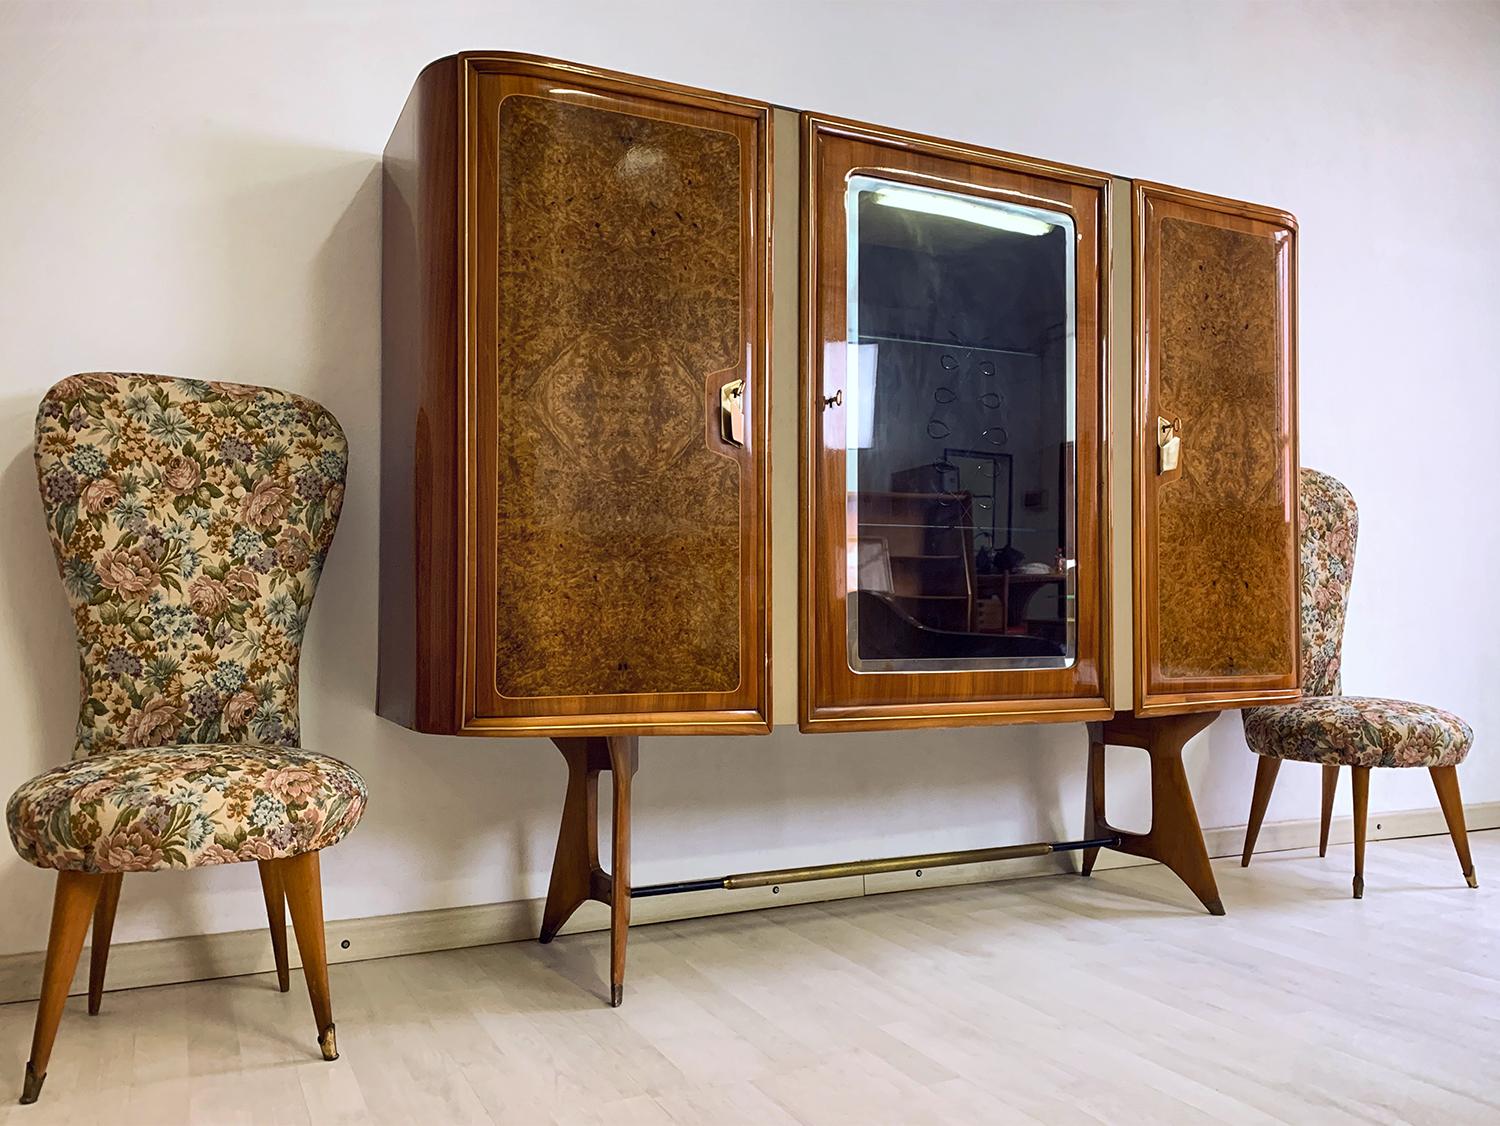 Superb sideboard and / or bar cabinet designed by Vittorio Dassi in the 1950s.
It's a very fine item made of precious materials as well as the two side doors of birch briar root, finished with fine brass handles, while the middle door is internal